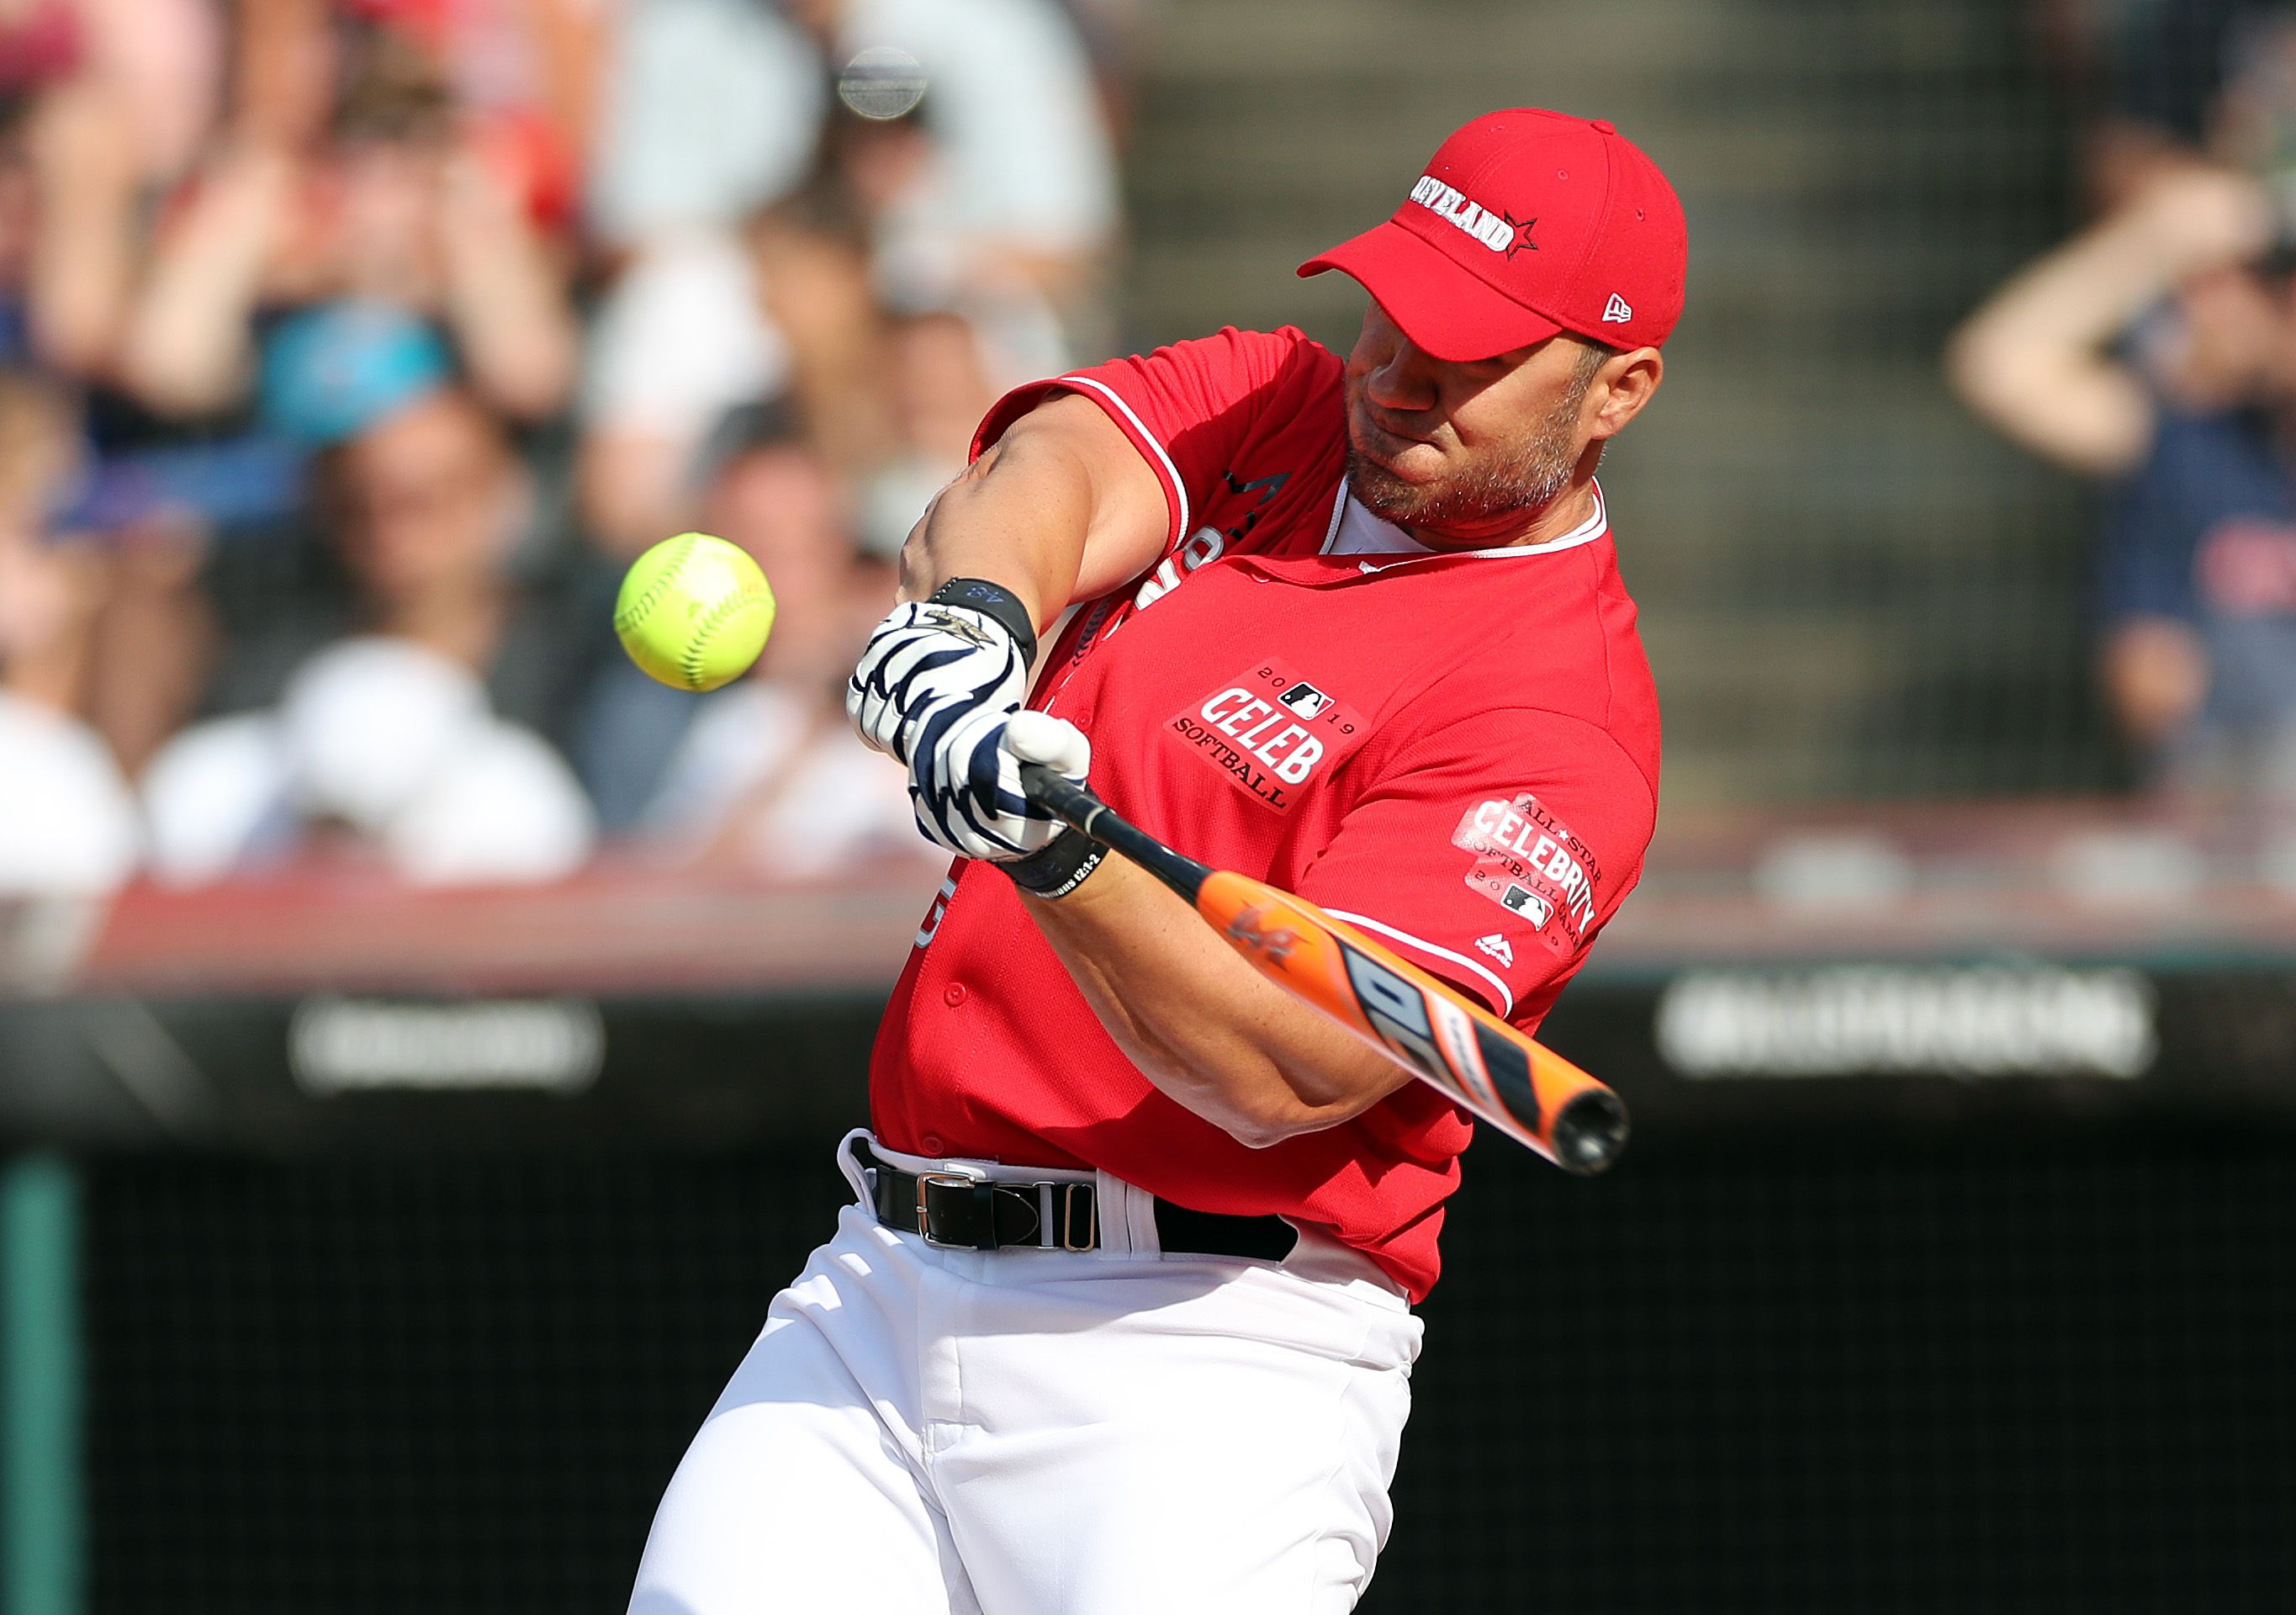 Jim Thome's kids get chance to shine in All-Star Celebrity Softball Game